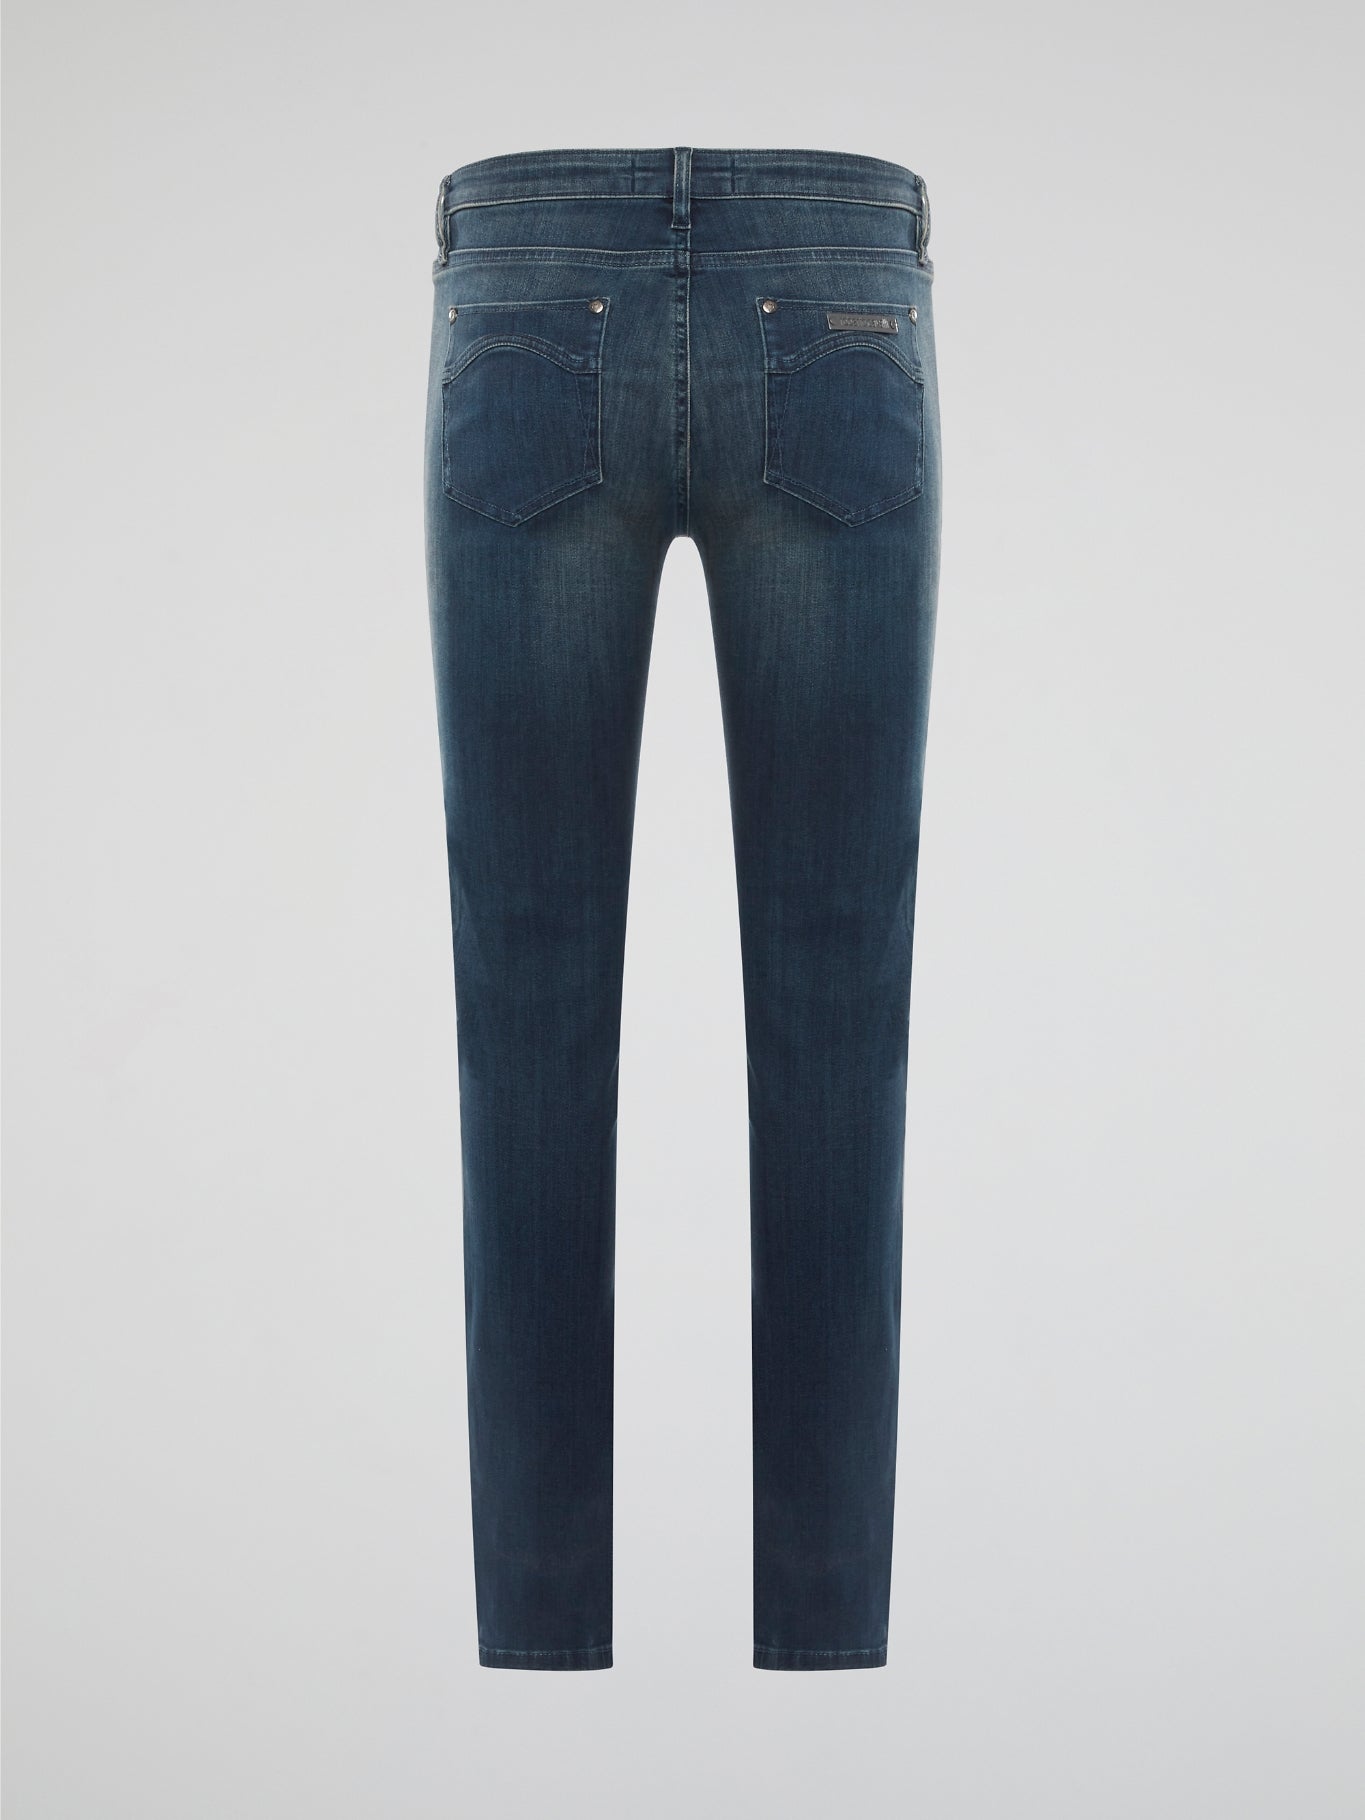 Elevate your denim game with these Stone Washed Skinny Denim Jeans by Roberto Cavalli, designed to hug your curves in all the right places. The unique stone wash finish gives these jeans a worn-in, vintage look that sets them apart from your average pair of skinny jeans. Pair them with a sleek blouse and heels for a chic and edgy urban look that will turn heads wherever you go.